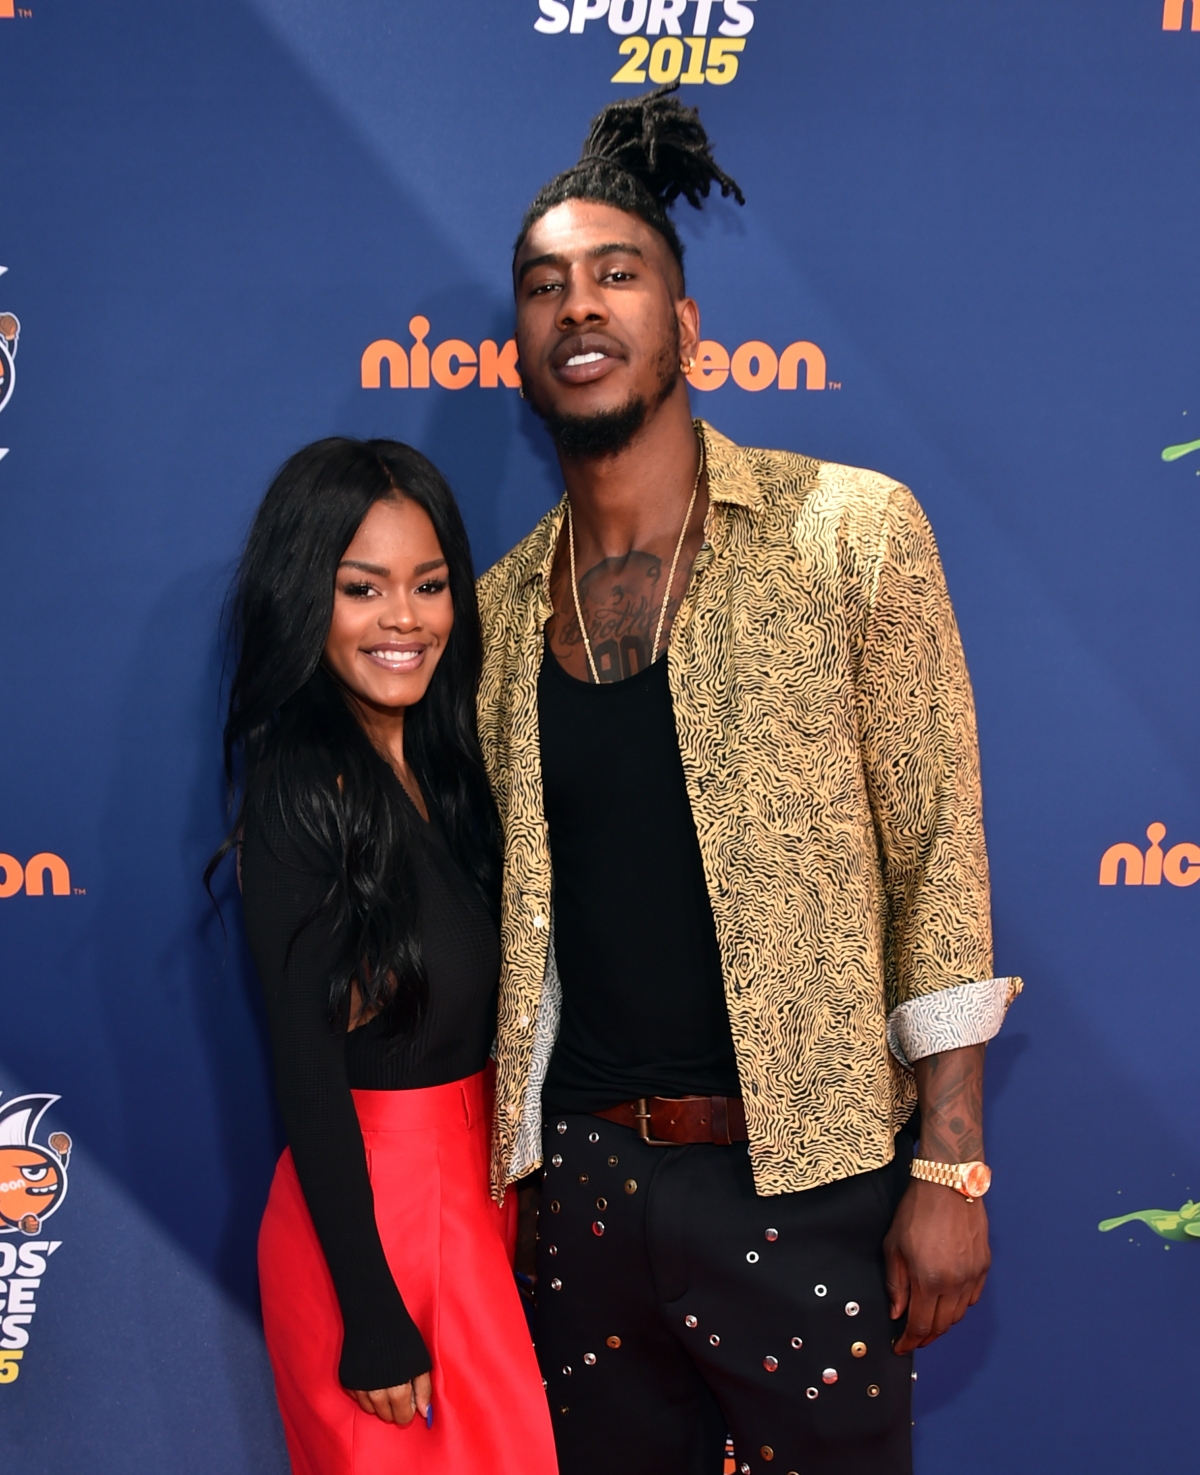 Teyana Taylor and Iman Shumpert engaged Cleveland Cavaliers player